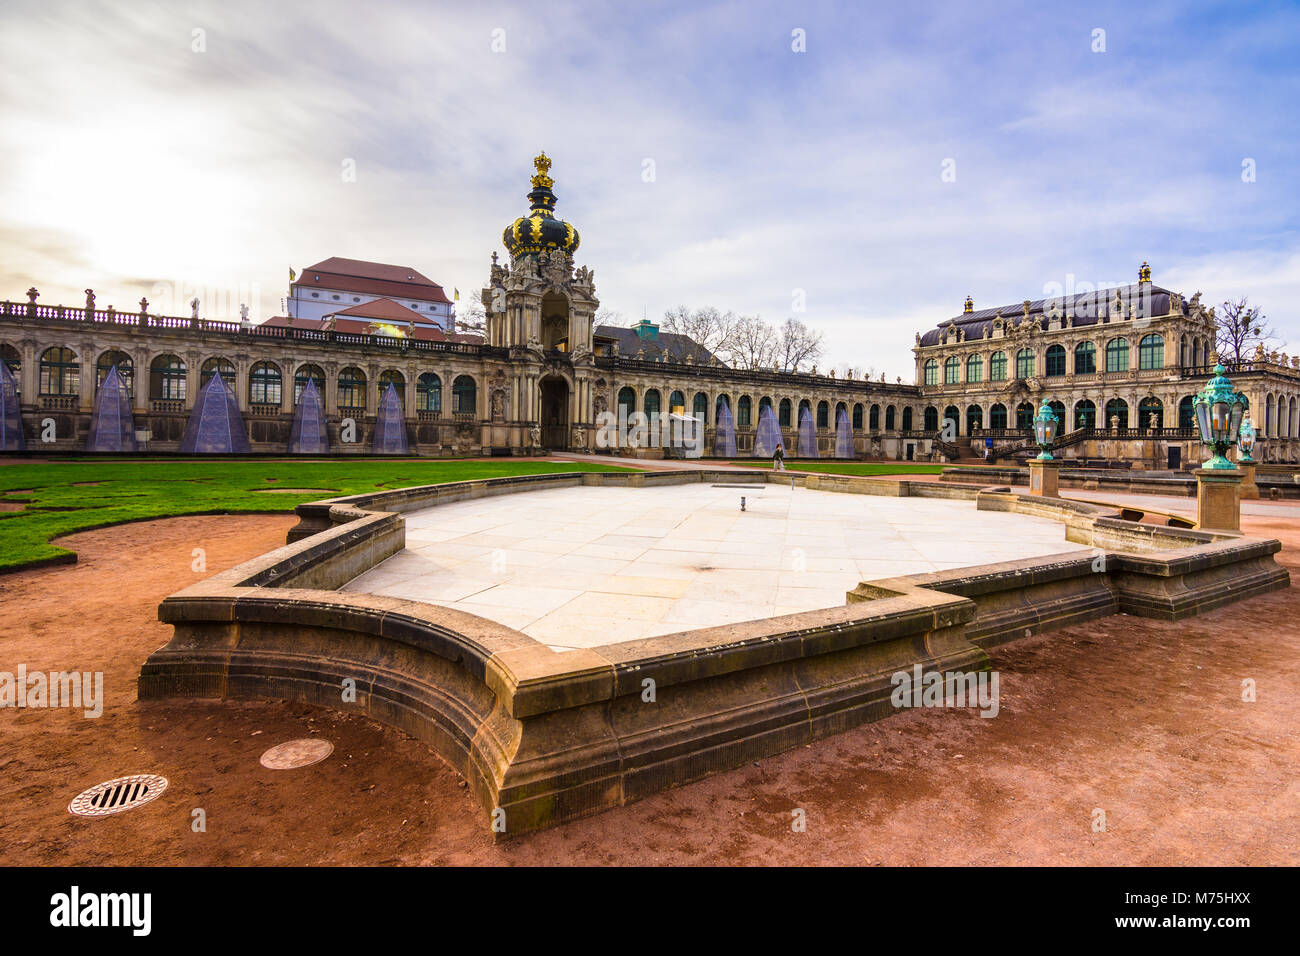 Zwinger palace, art gallery and museum in Dresden, Germany. Stock Photo